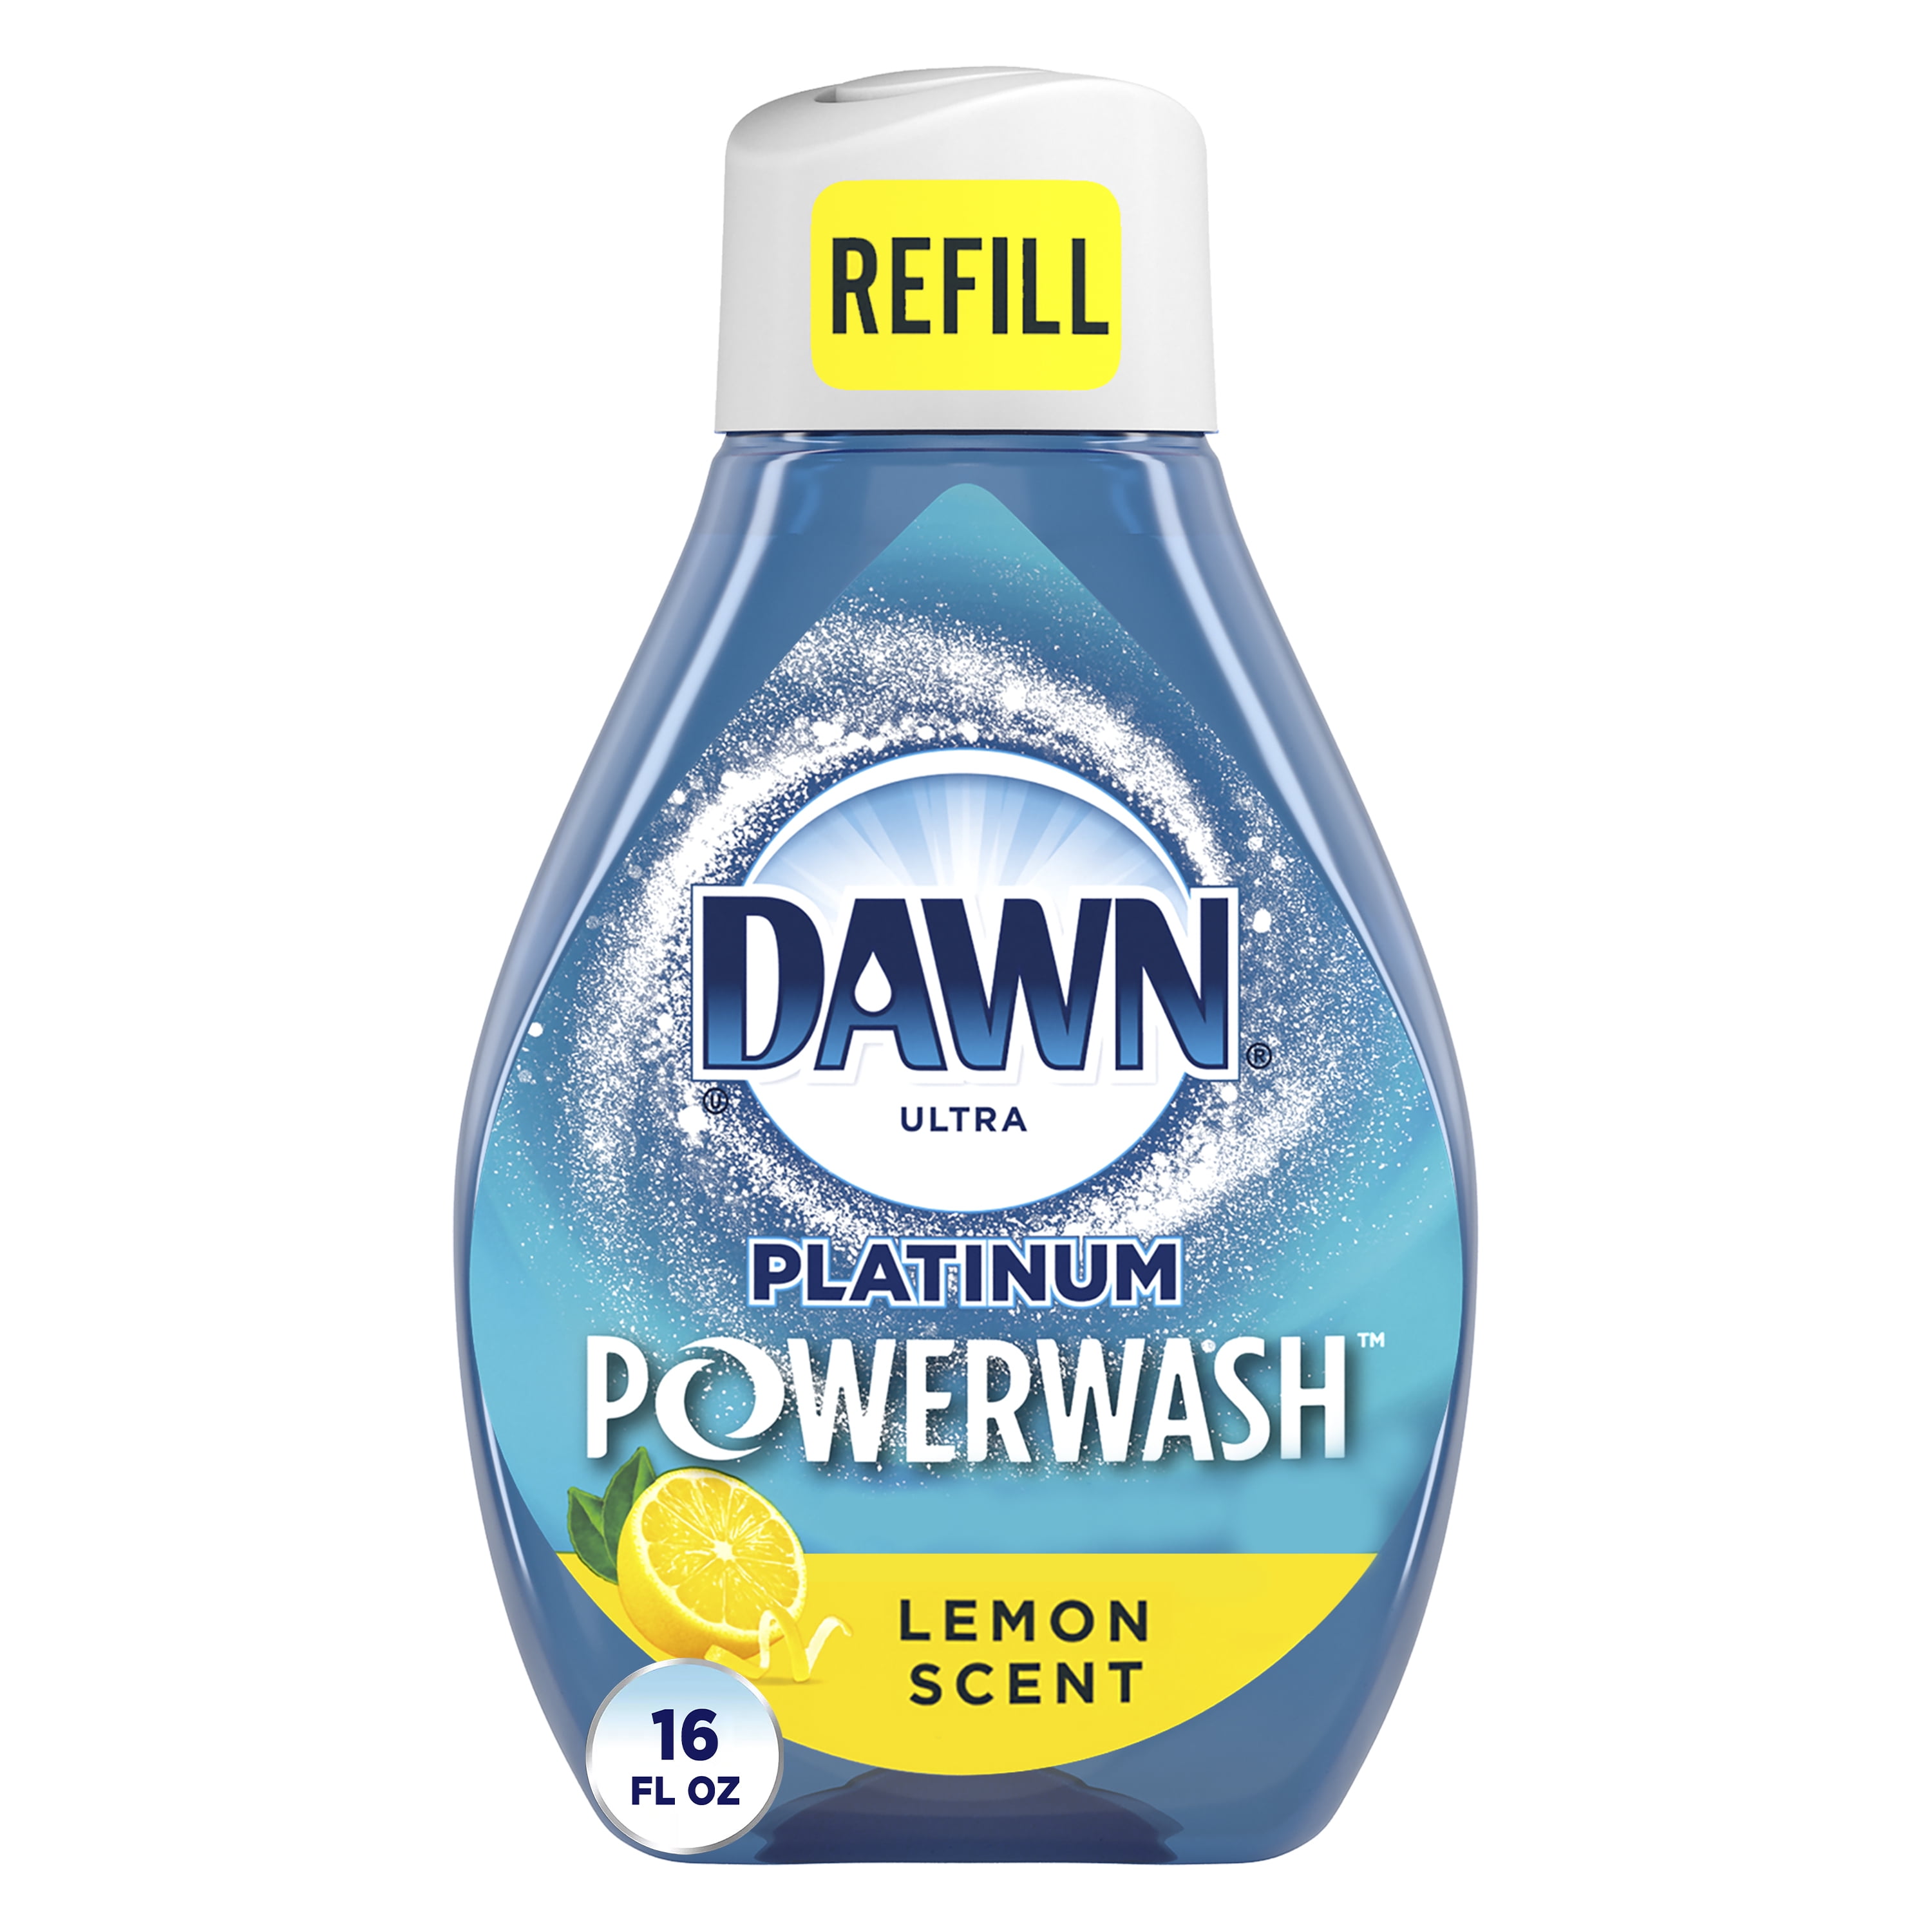 Dawn Platinum Powerwash Dish Spray Review 2023 - The Cleaning Lady